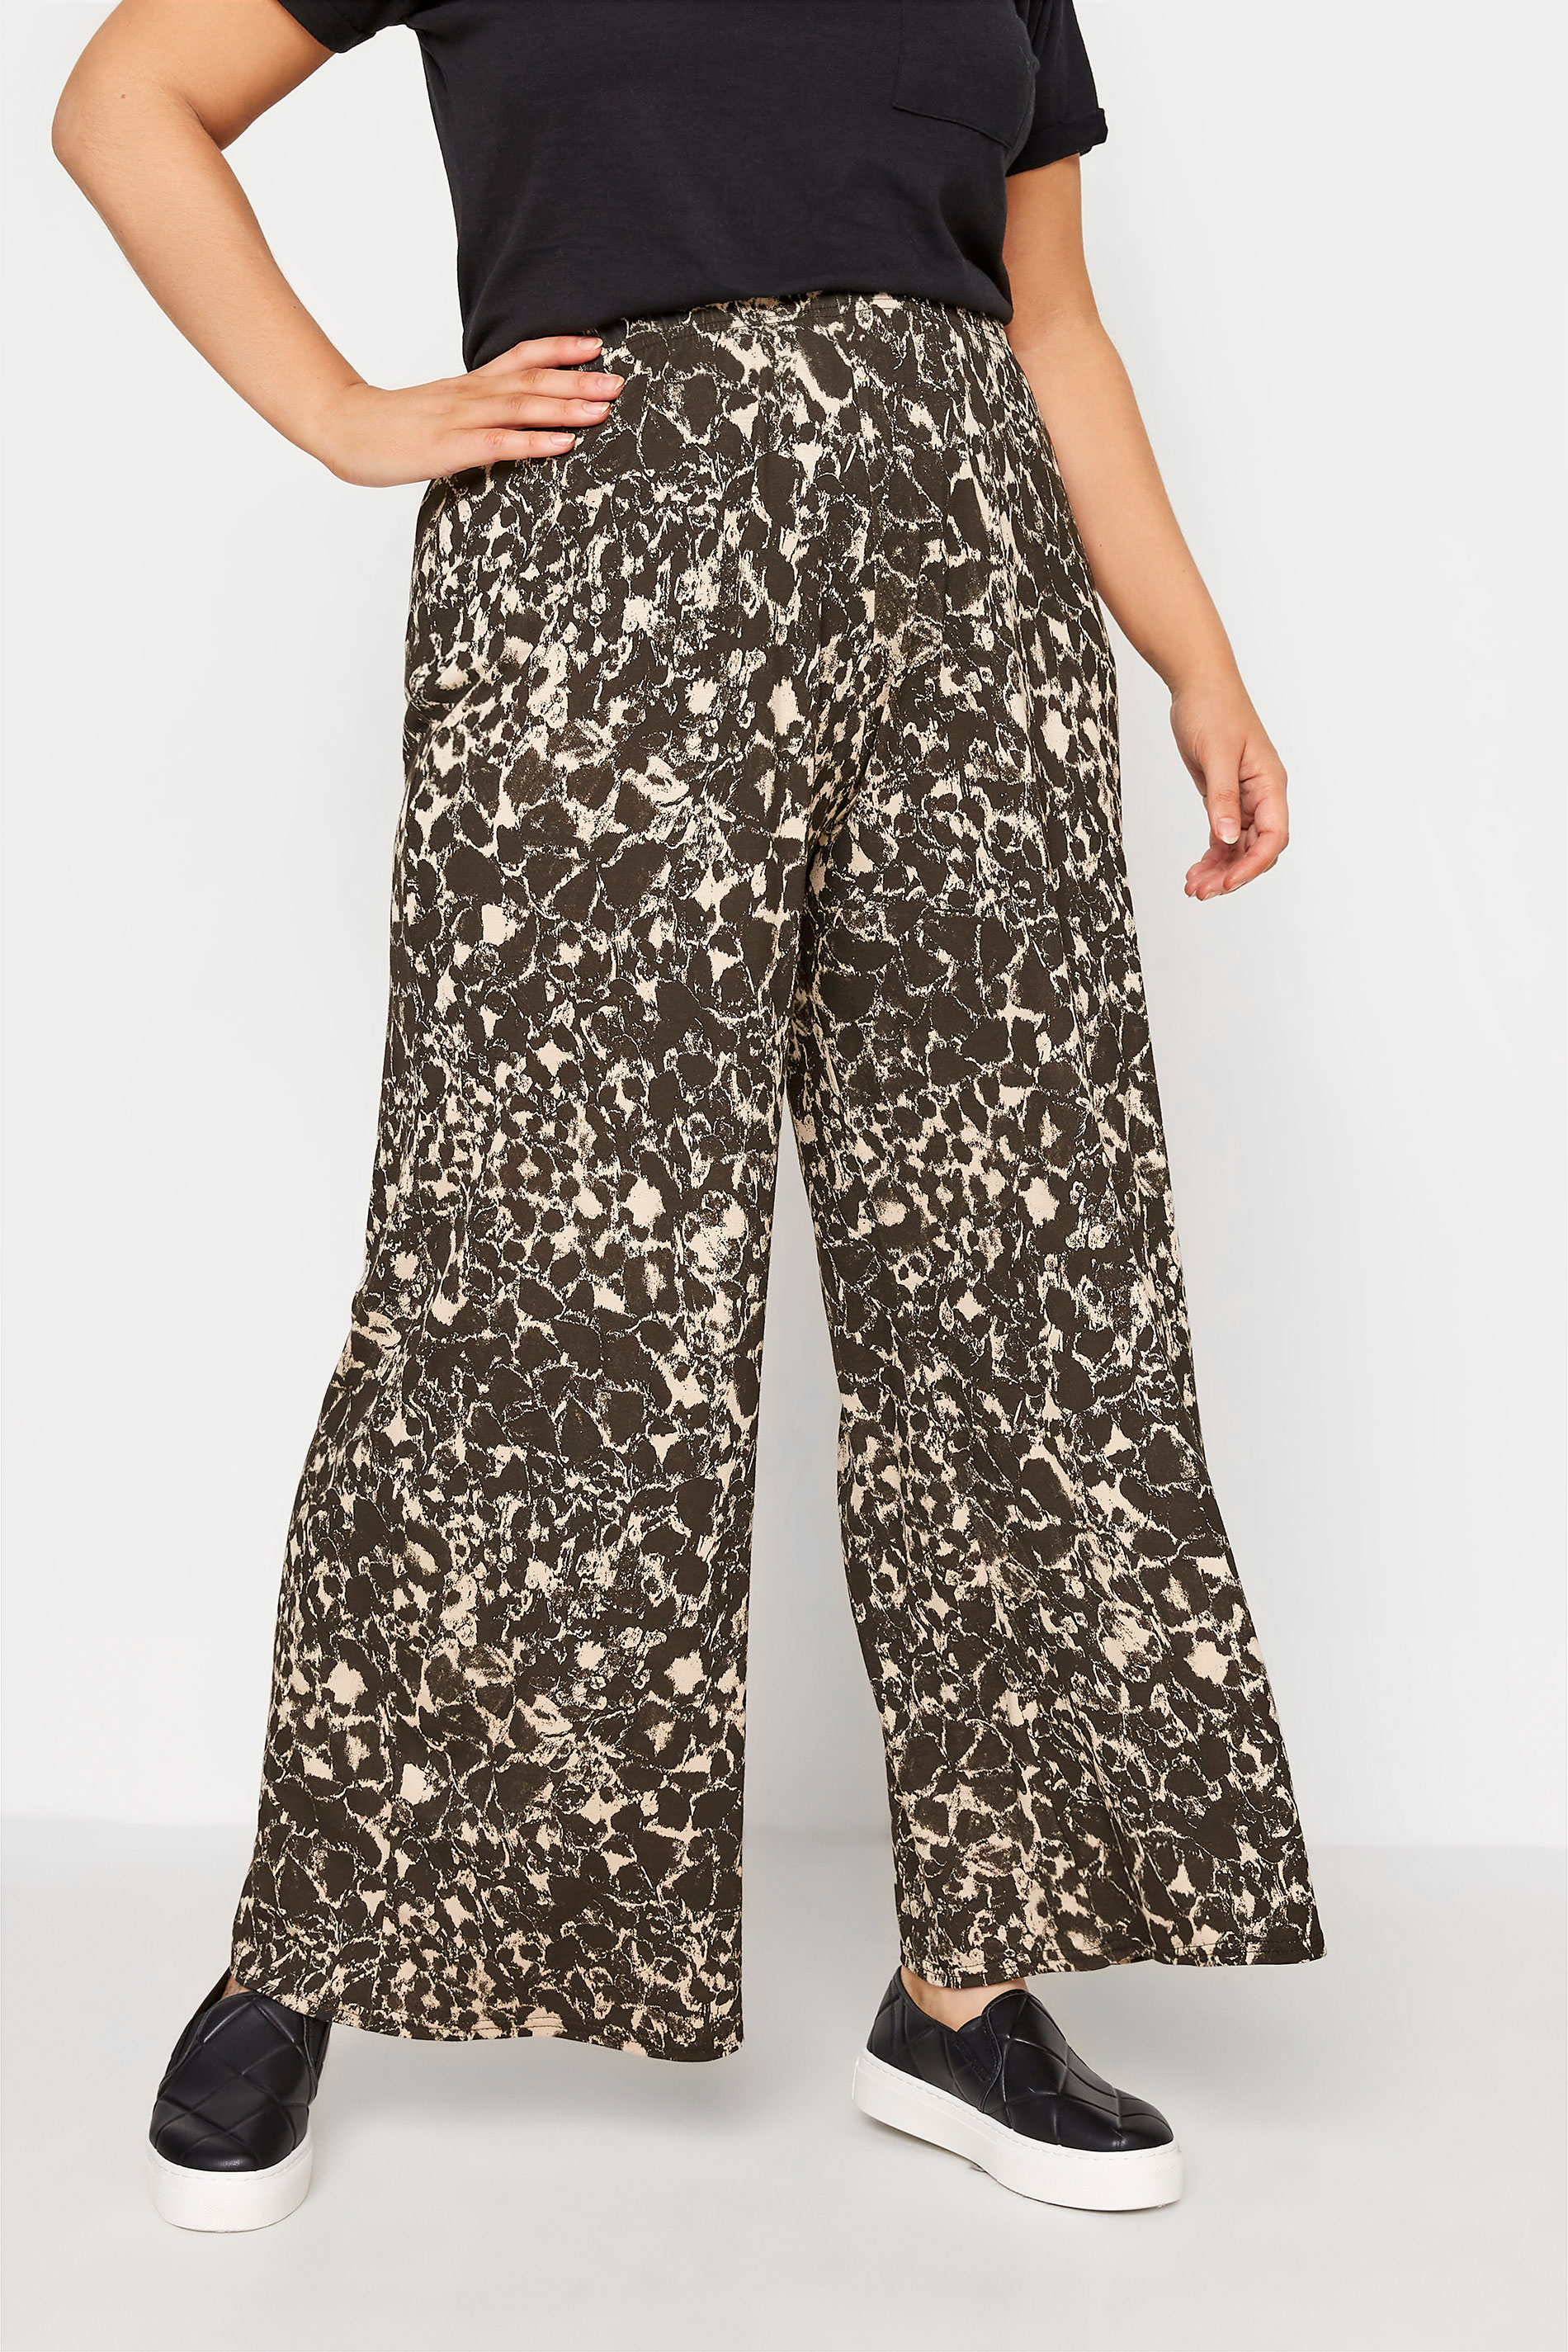 LIMITED COLLECTION Plus Size Black Leopard Print Wide Leg Trousers | Yours Clothing  1